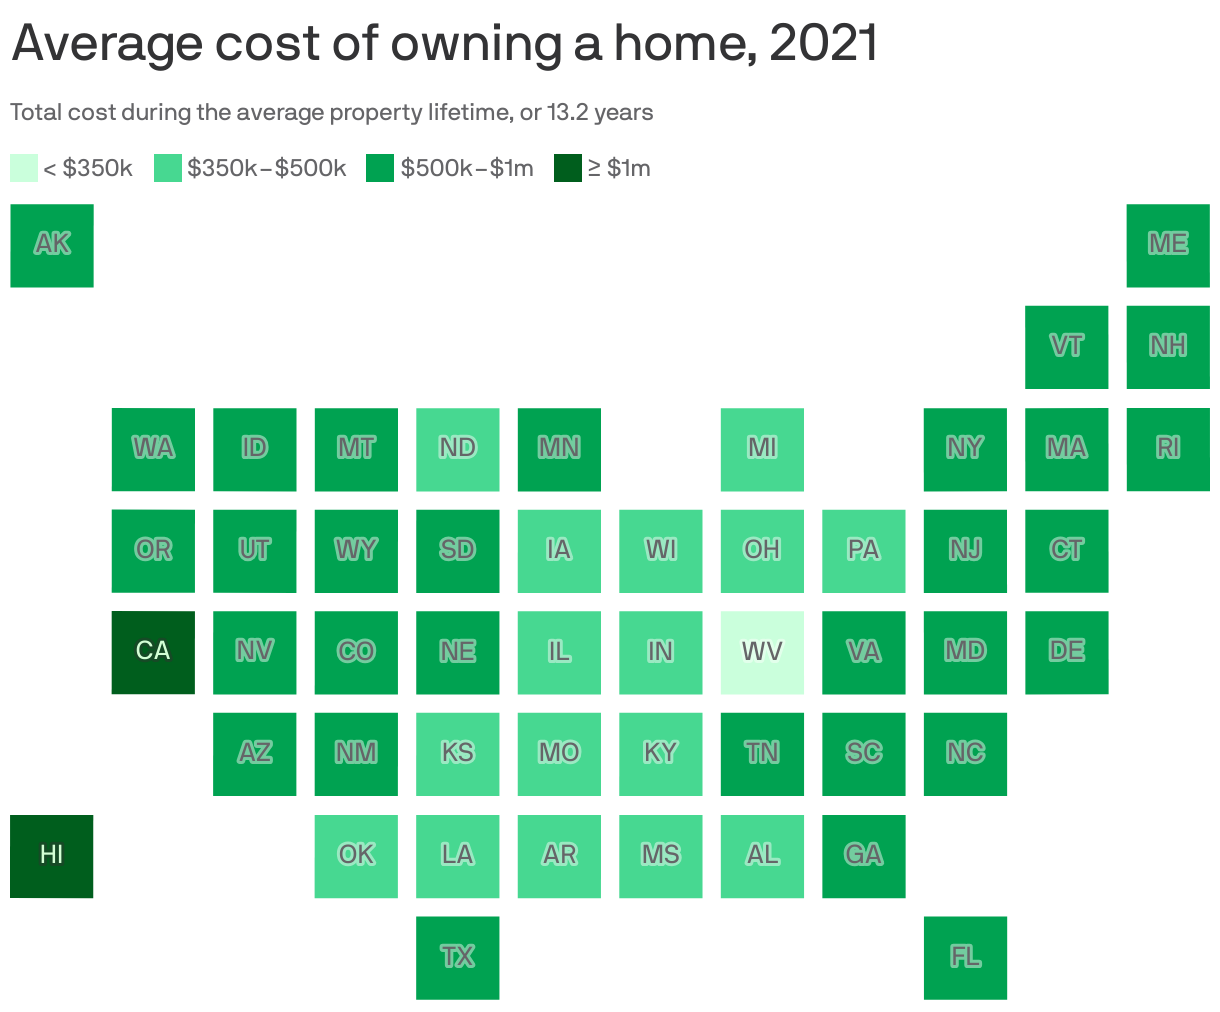 Average cost of owning a home, 2021